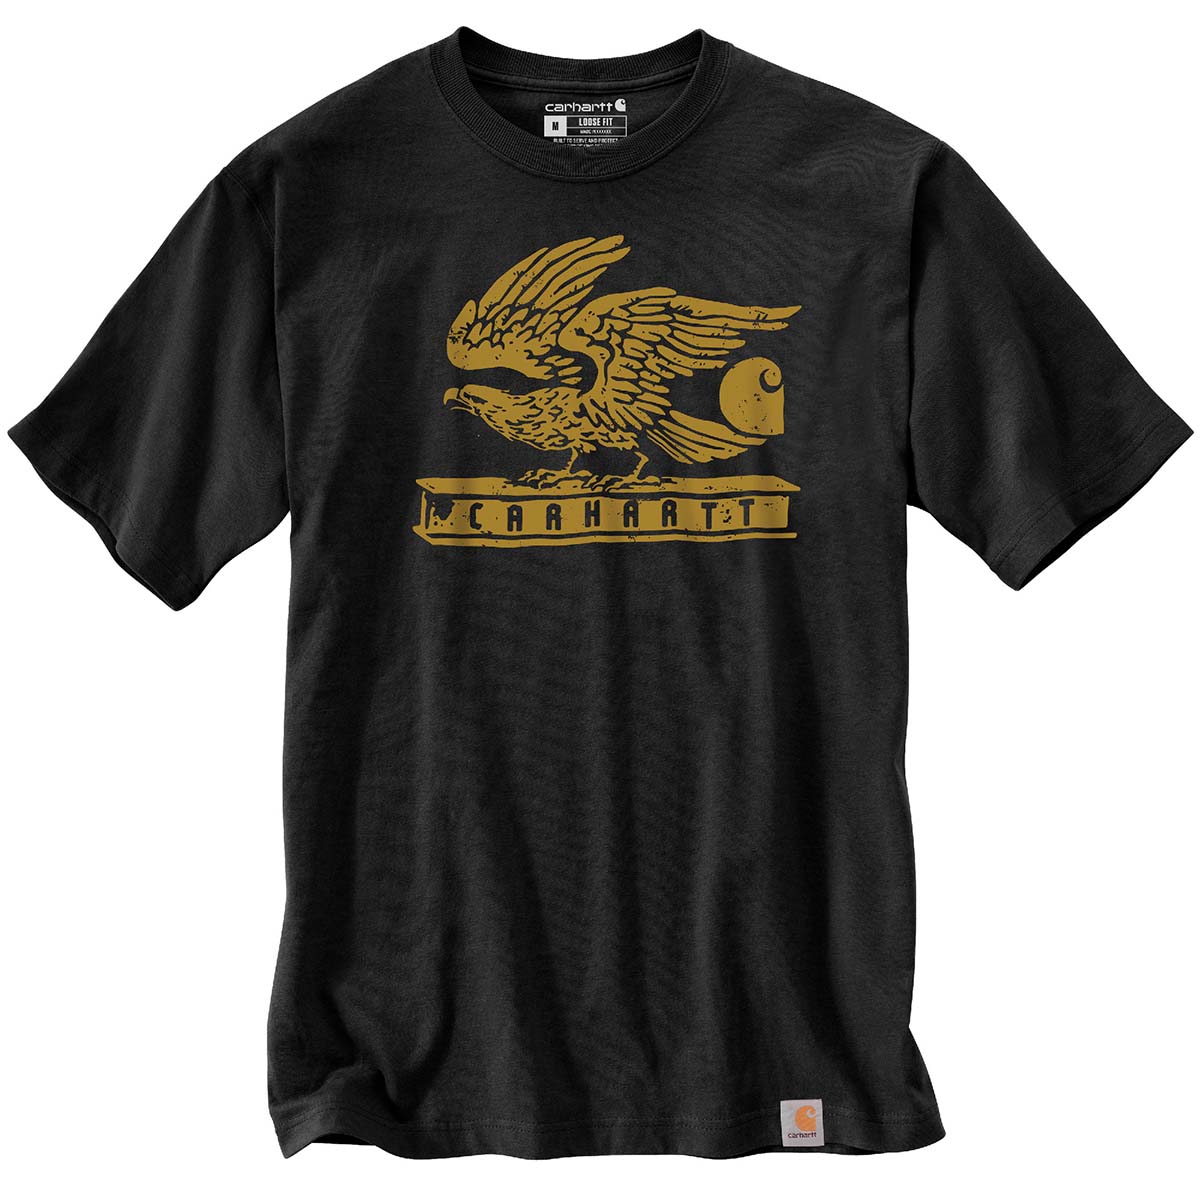 Carhartt Men's Loose Fit Heavyweight SS Eagle Graphic T-Shirt